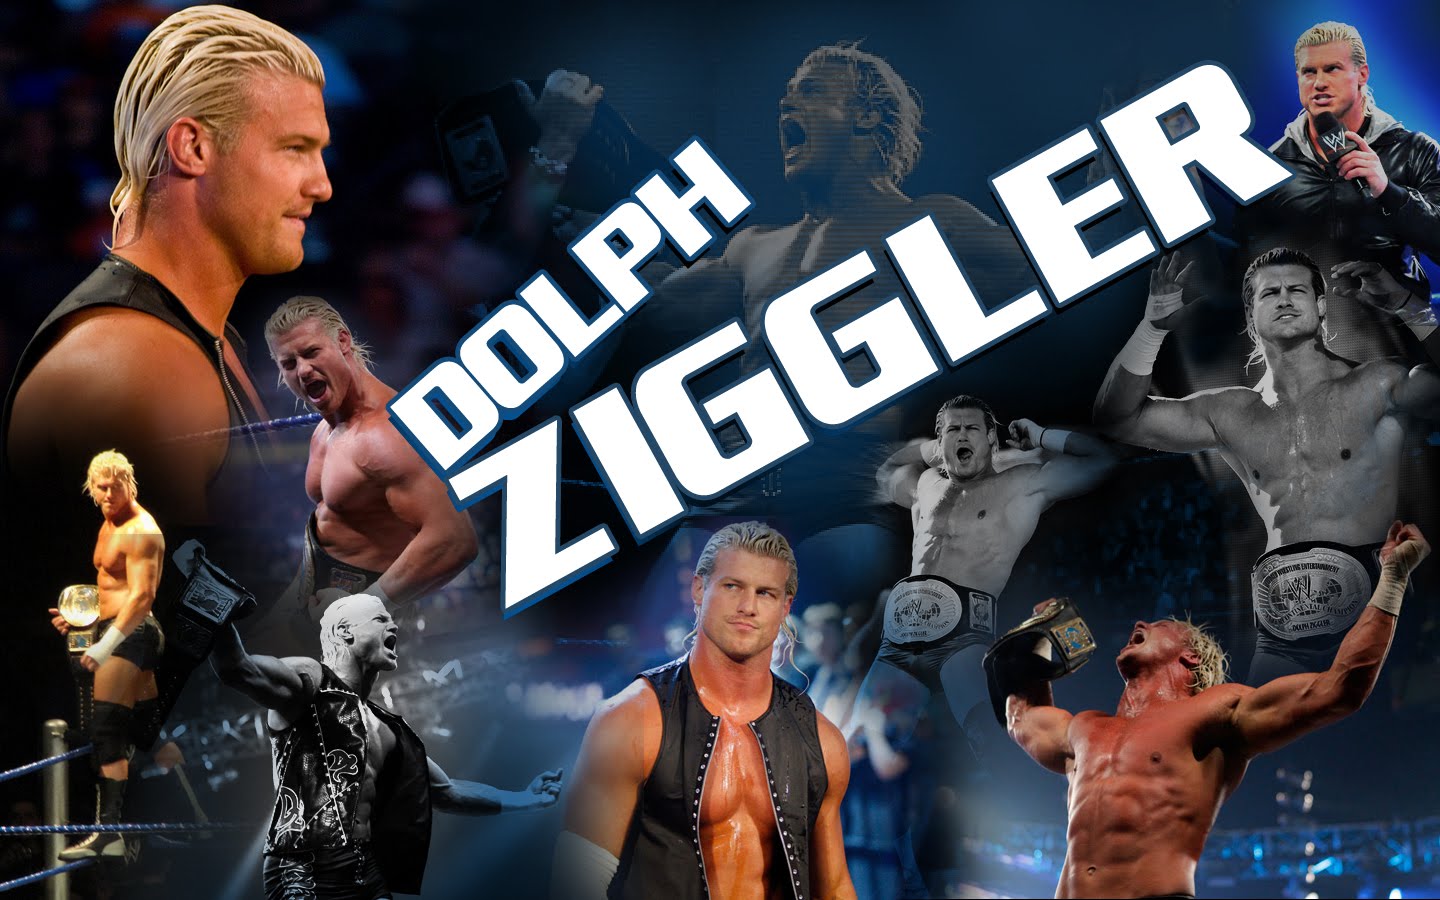 wwe wallpaper,championship,wrestler,shootfighting,professional wrestling,competition event